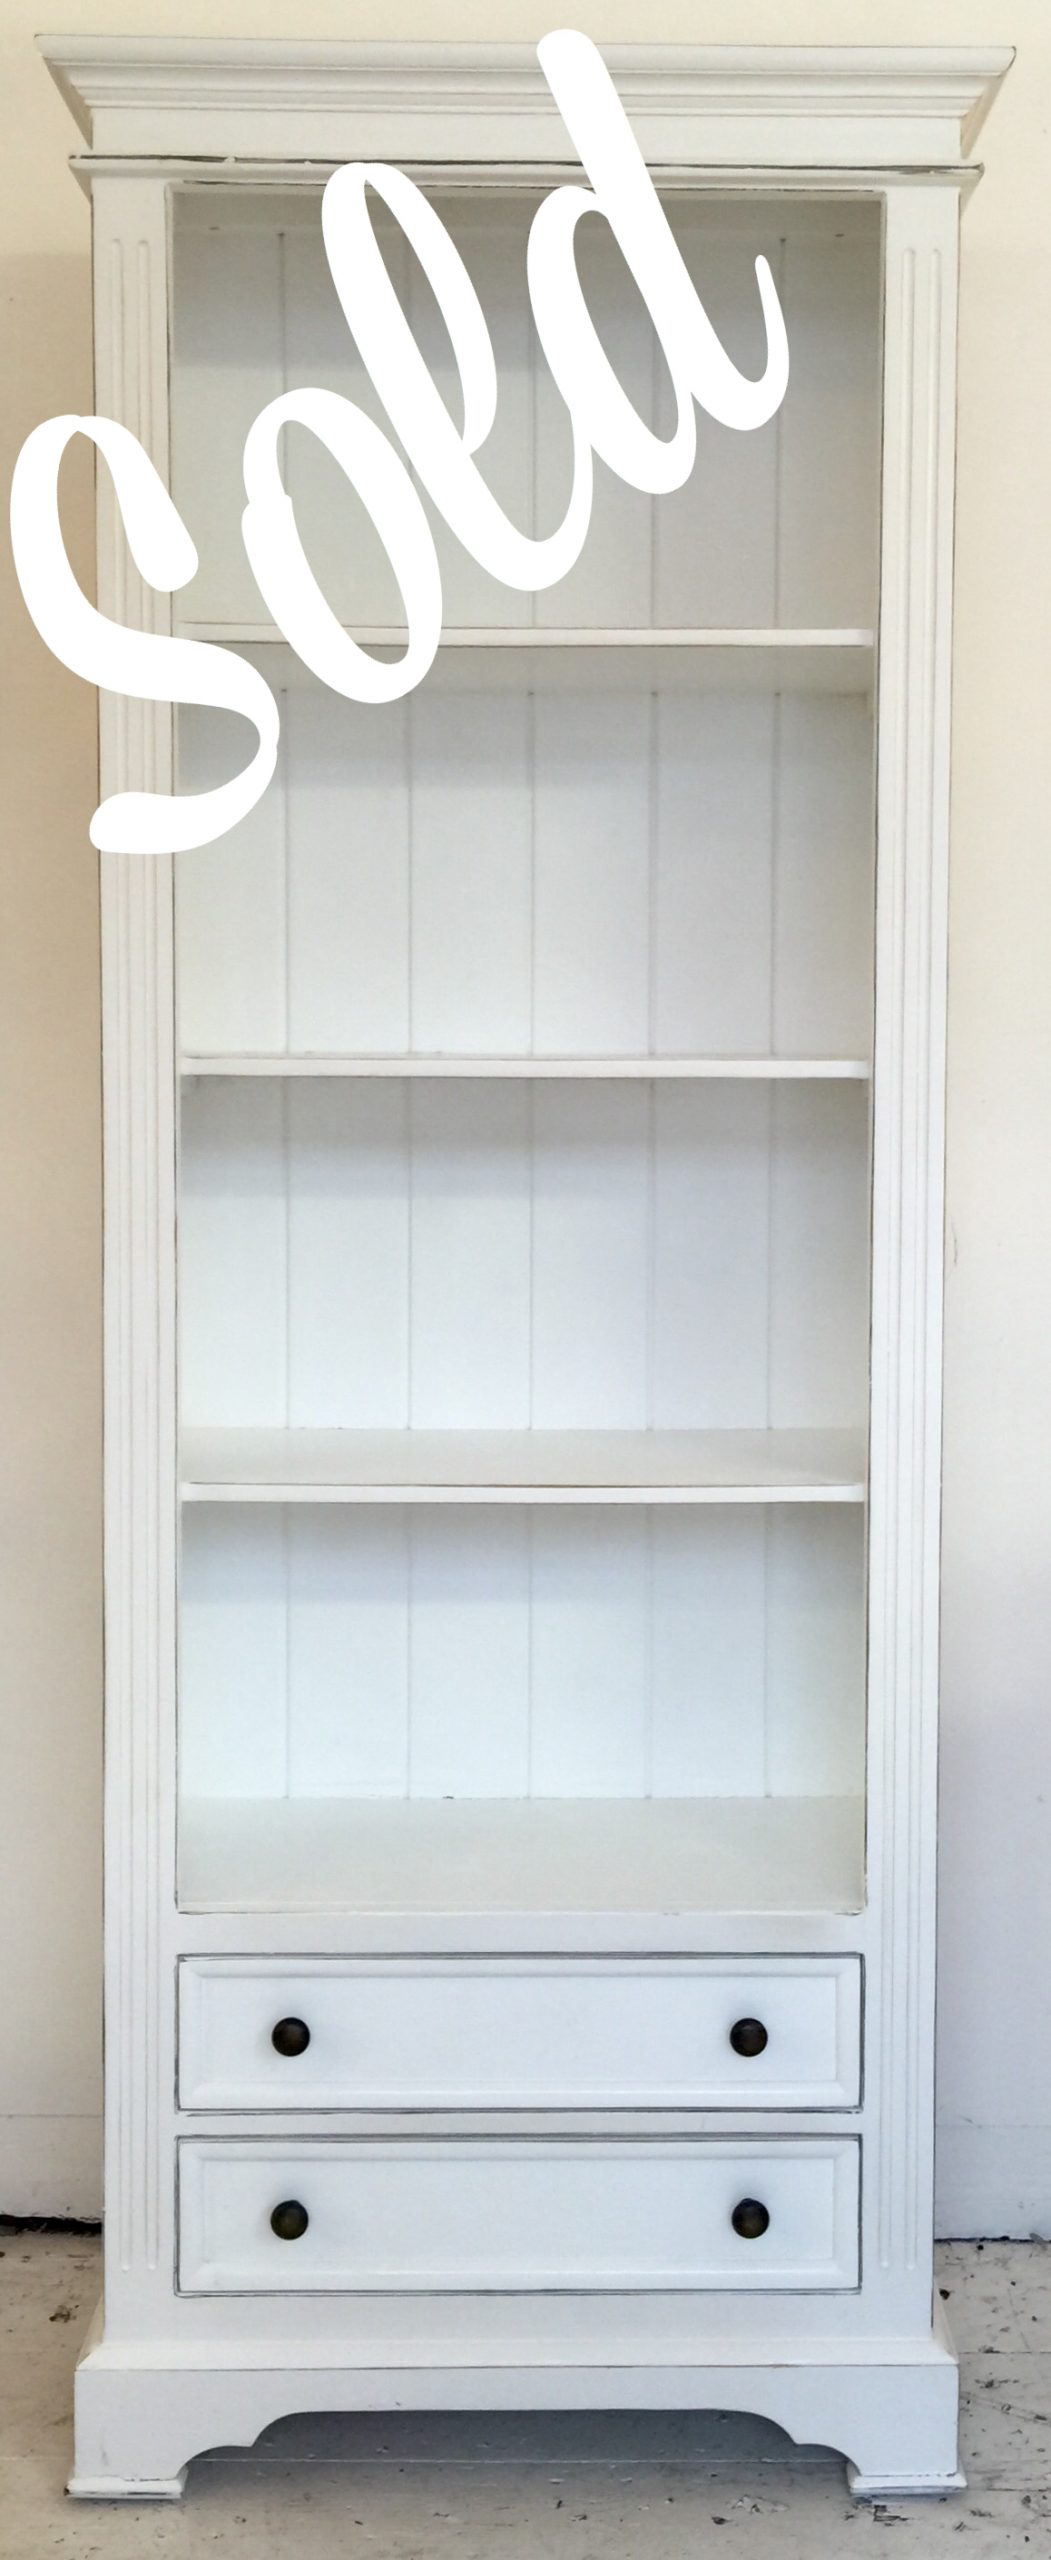 Tall White Bookcase With Drawers regarding dimensions 1158 X 2821